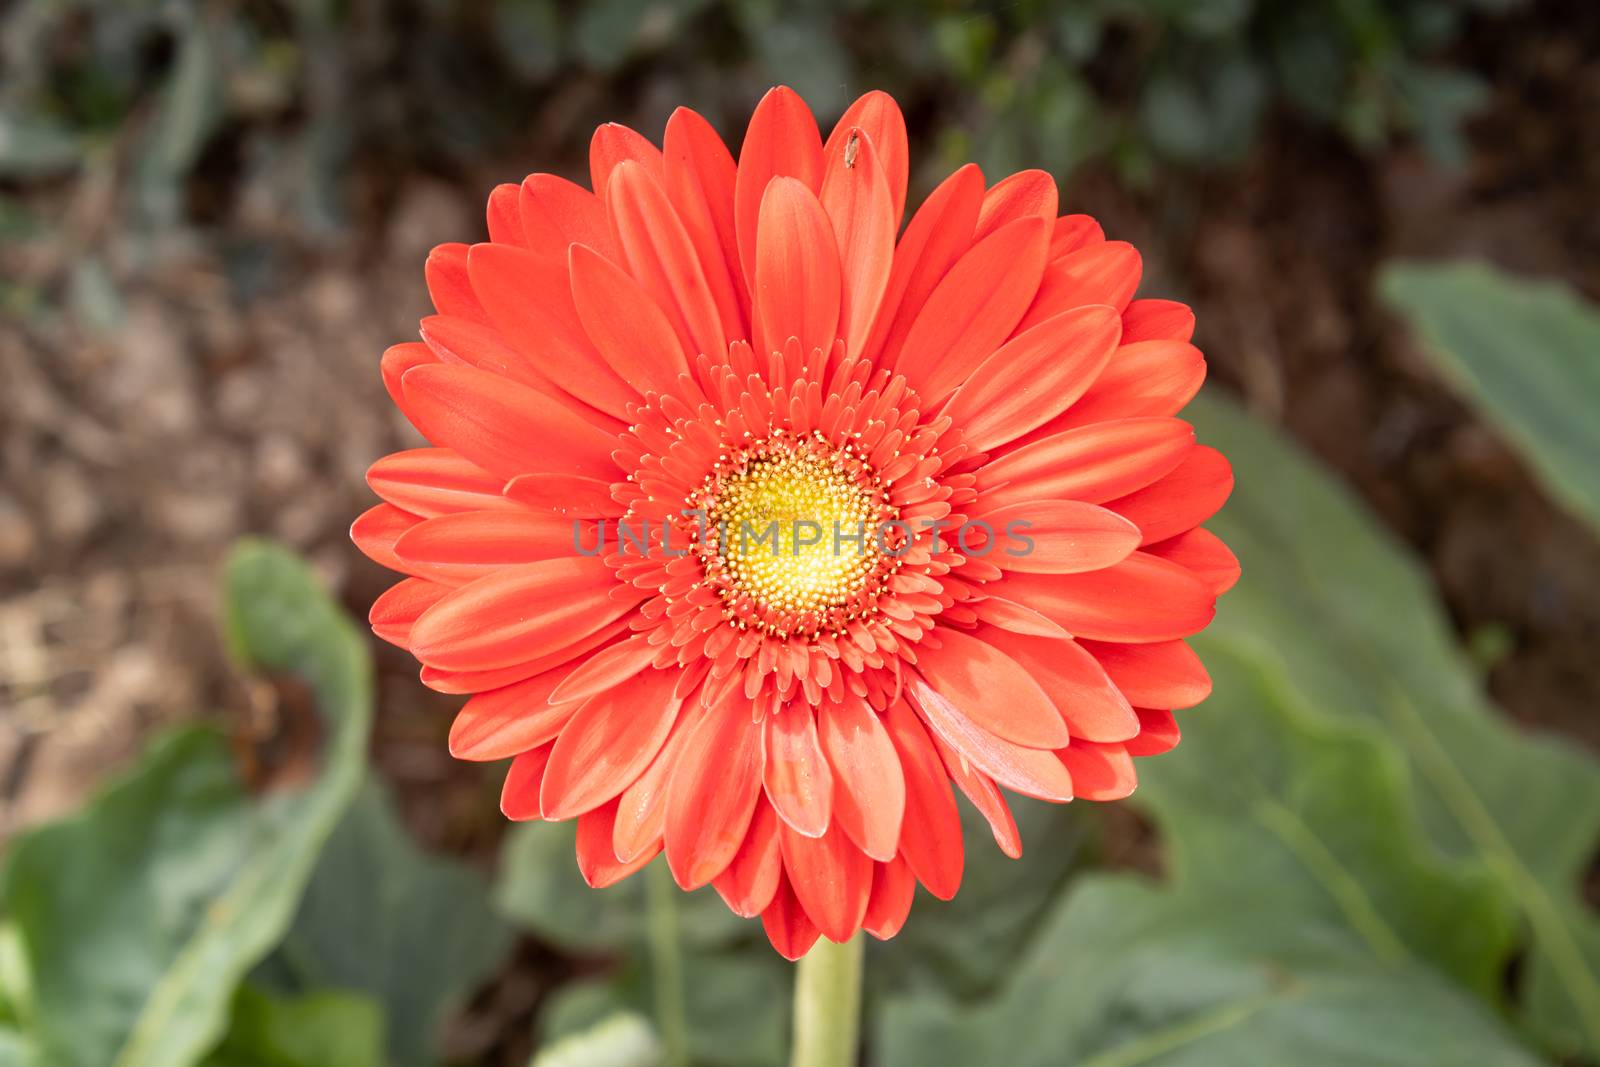 Red Gerbera Daisy or Gerbera Flower on Center Frame by steafpong